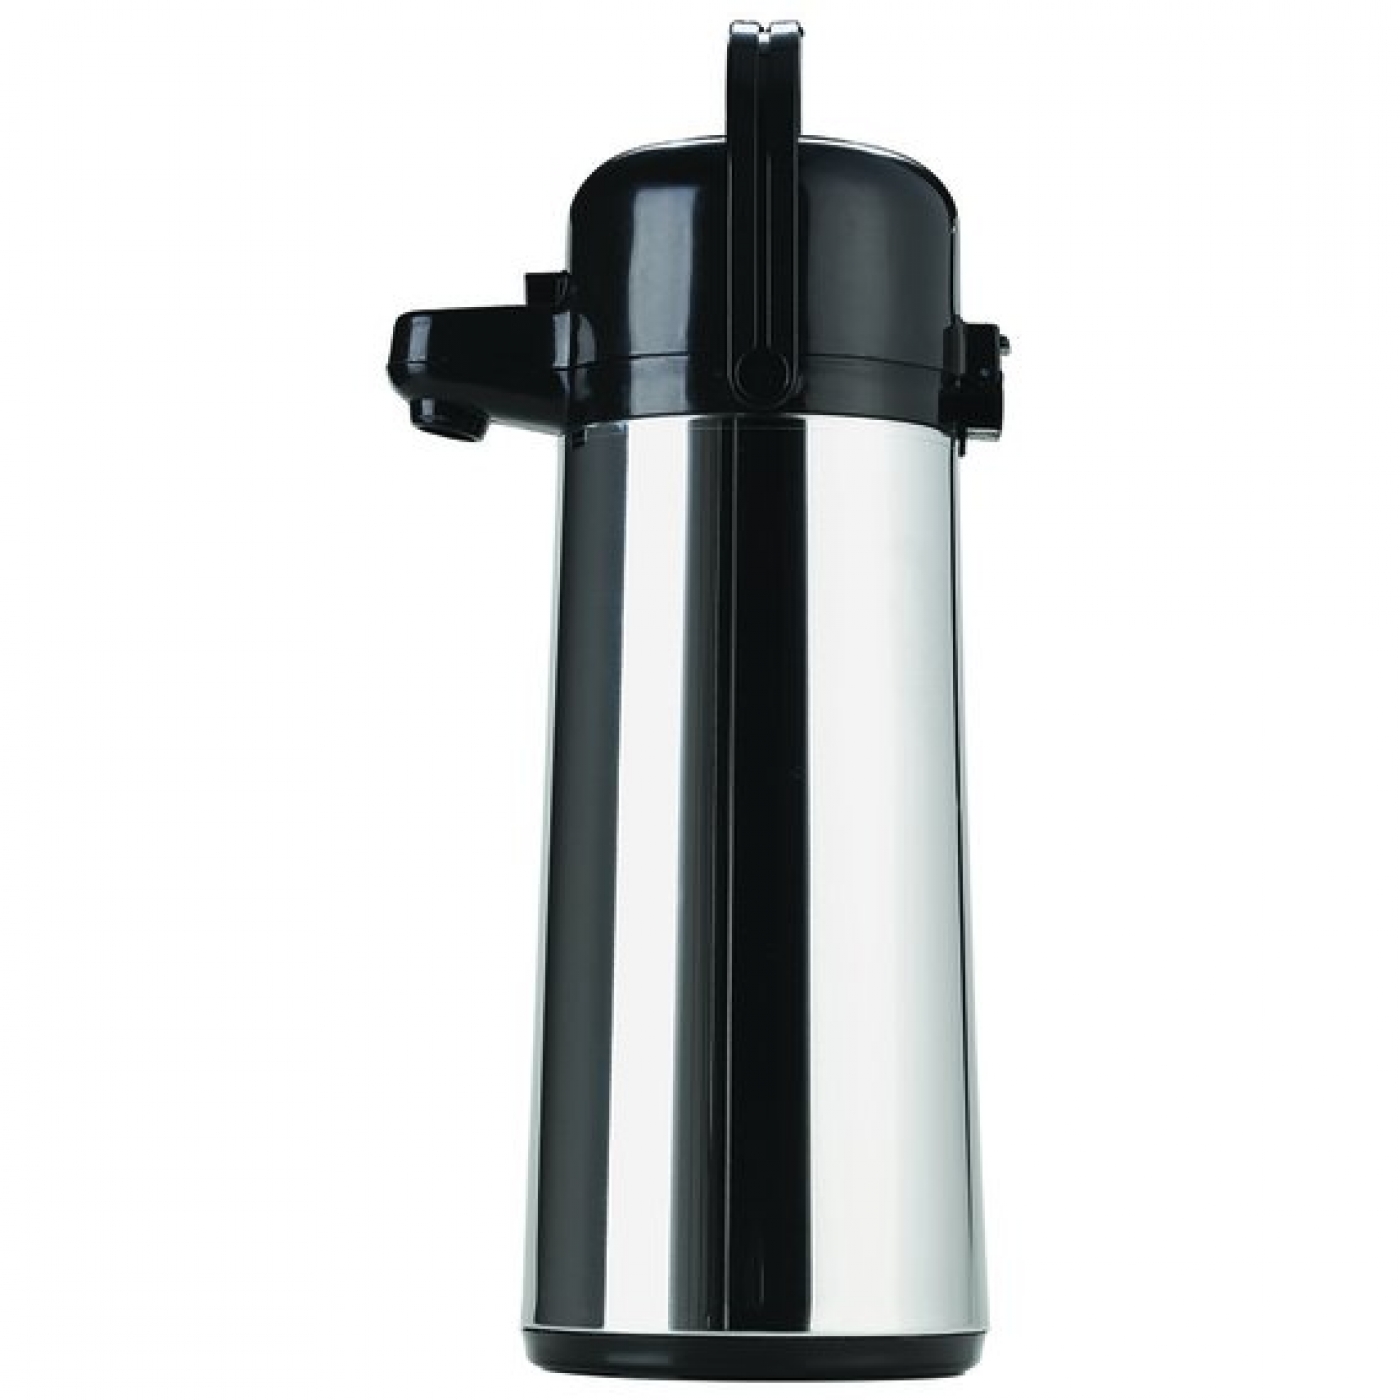 AIR POT 1.8L STAINLESS STEEL